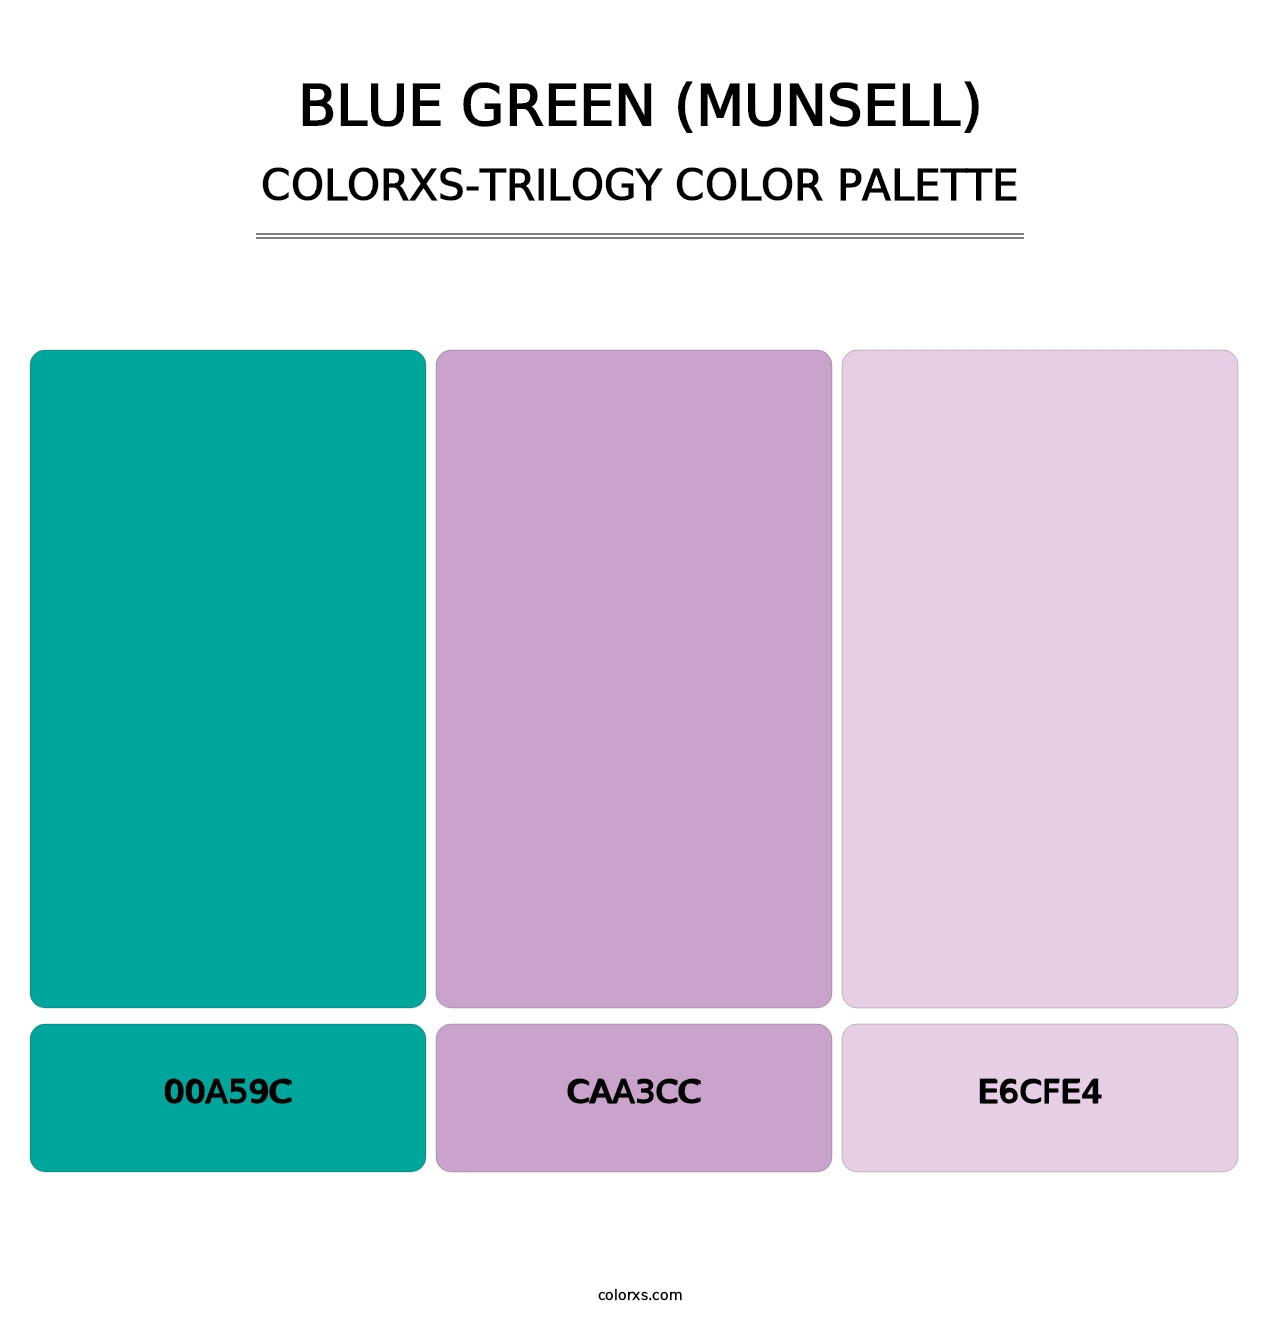 Blue Green (Munsell) - Colorxs Trilogy Palette